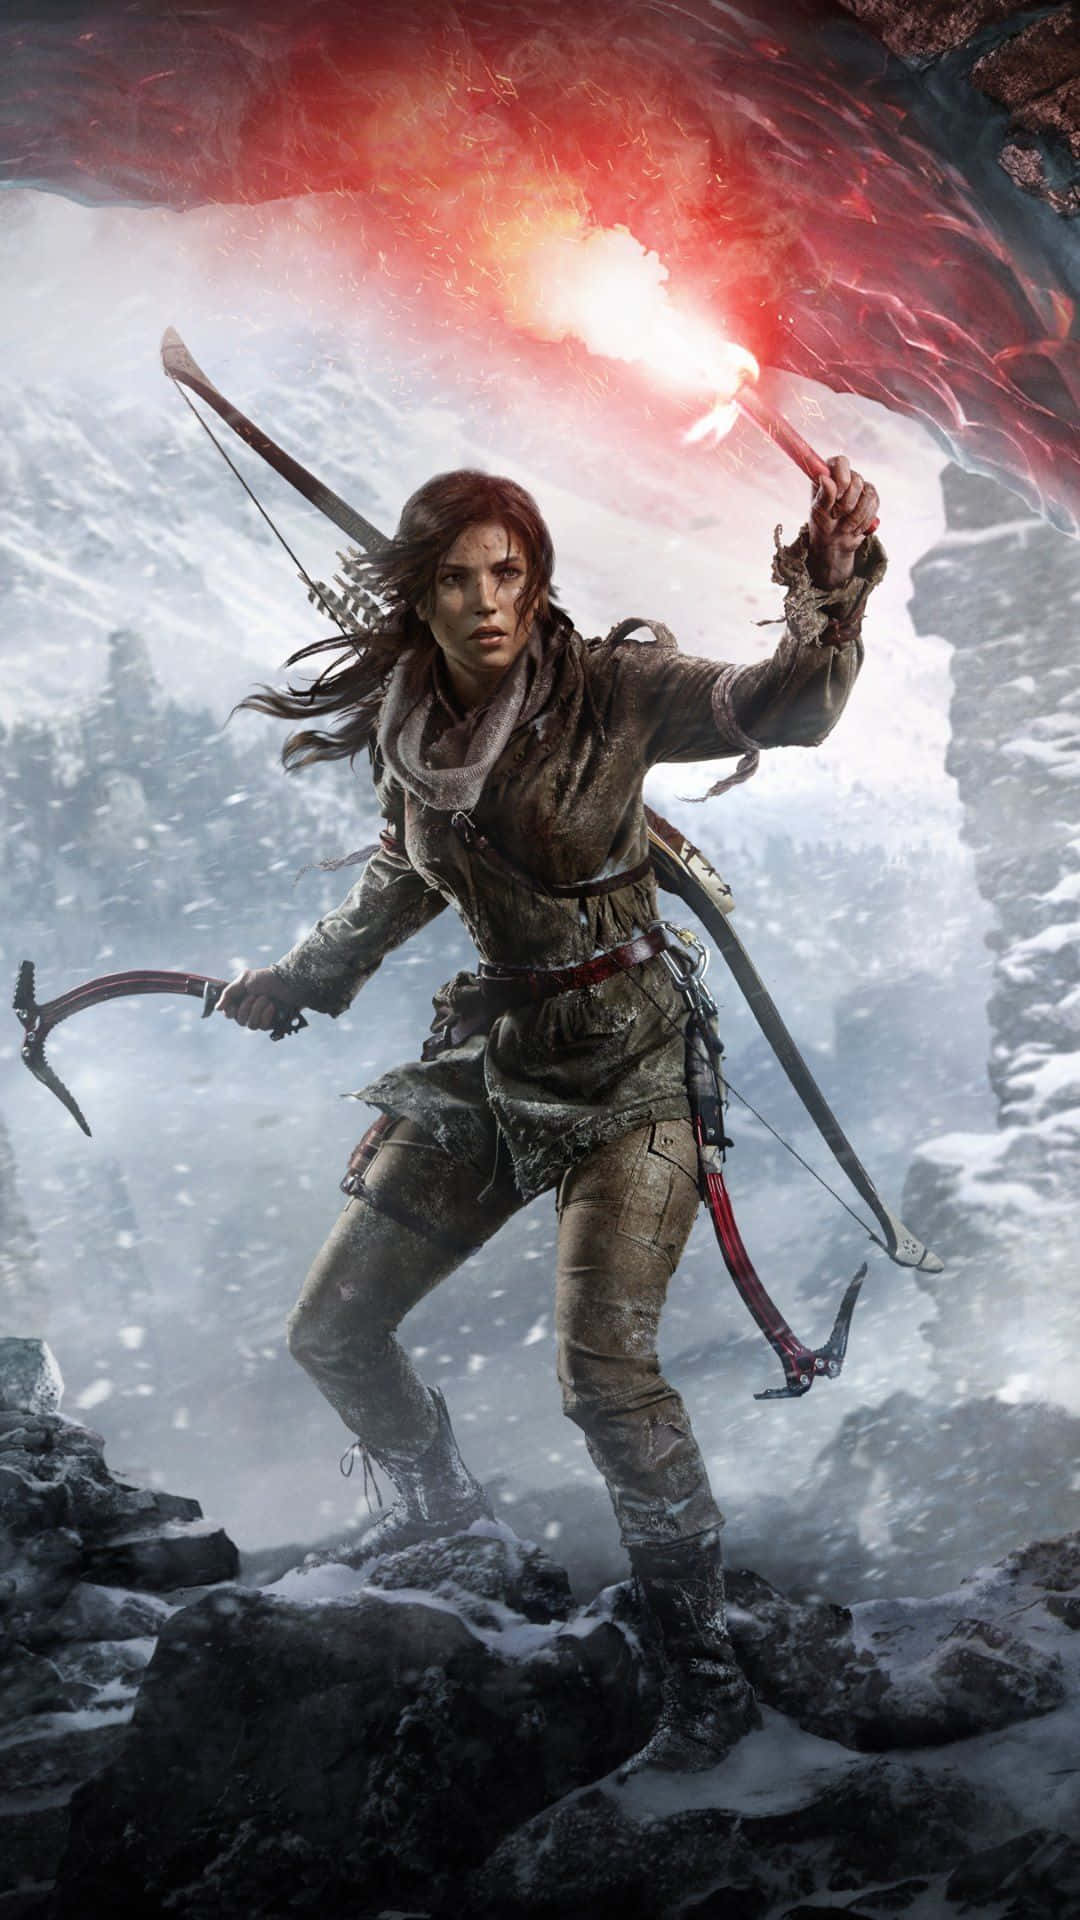 Explore New Worlds with the Tomb Raider Phone Wallpaper